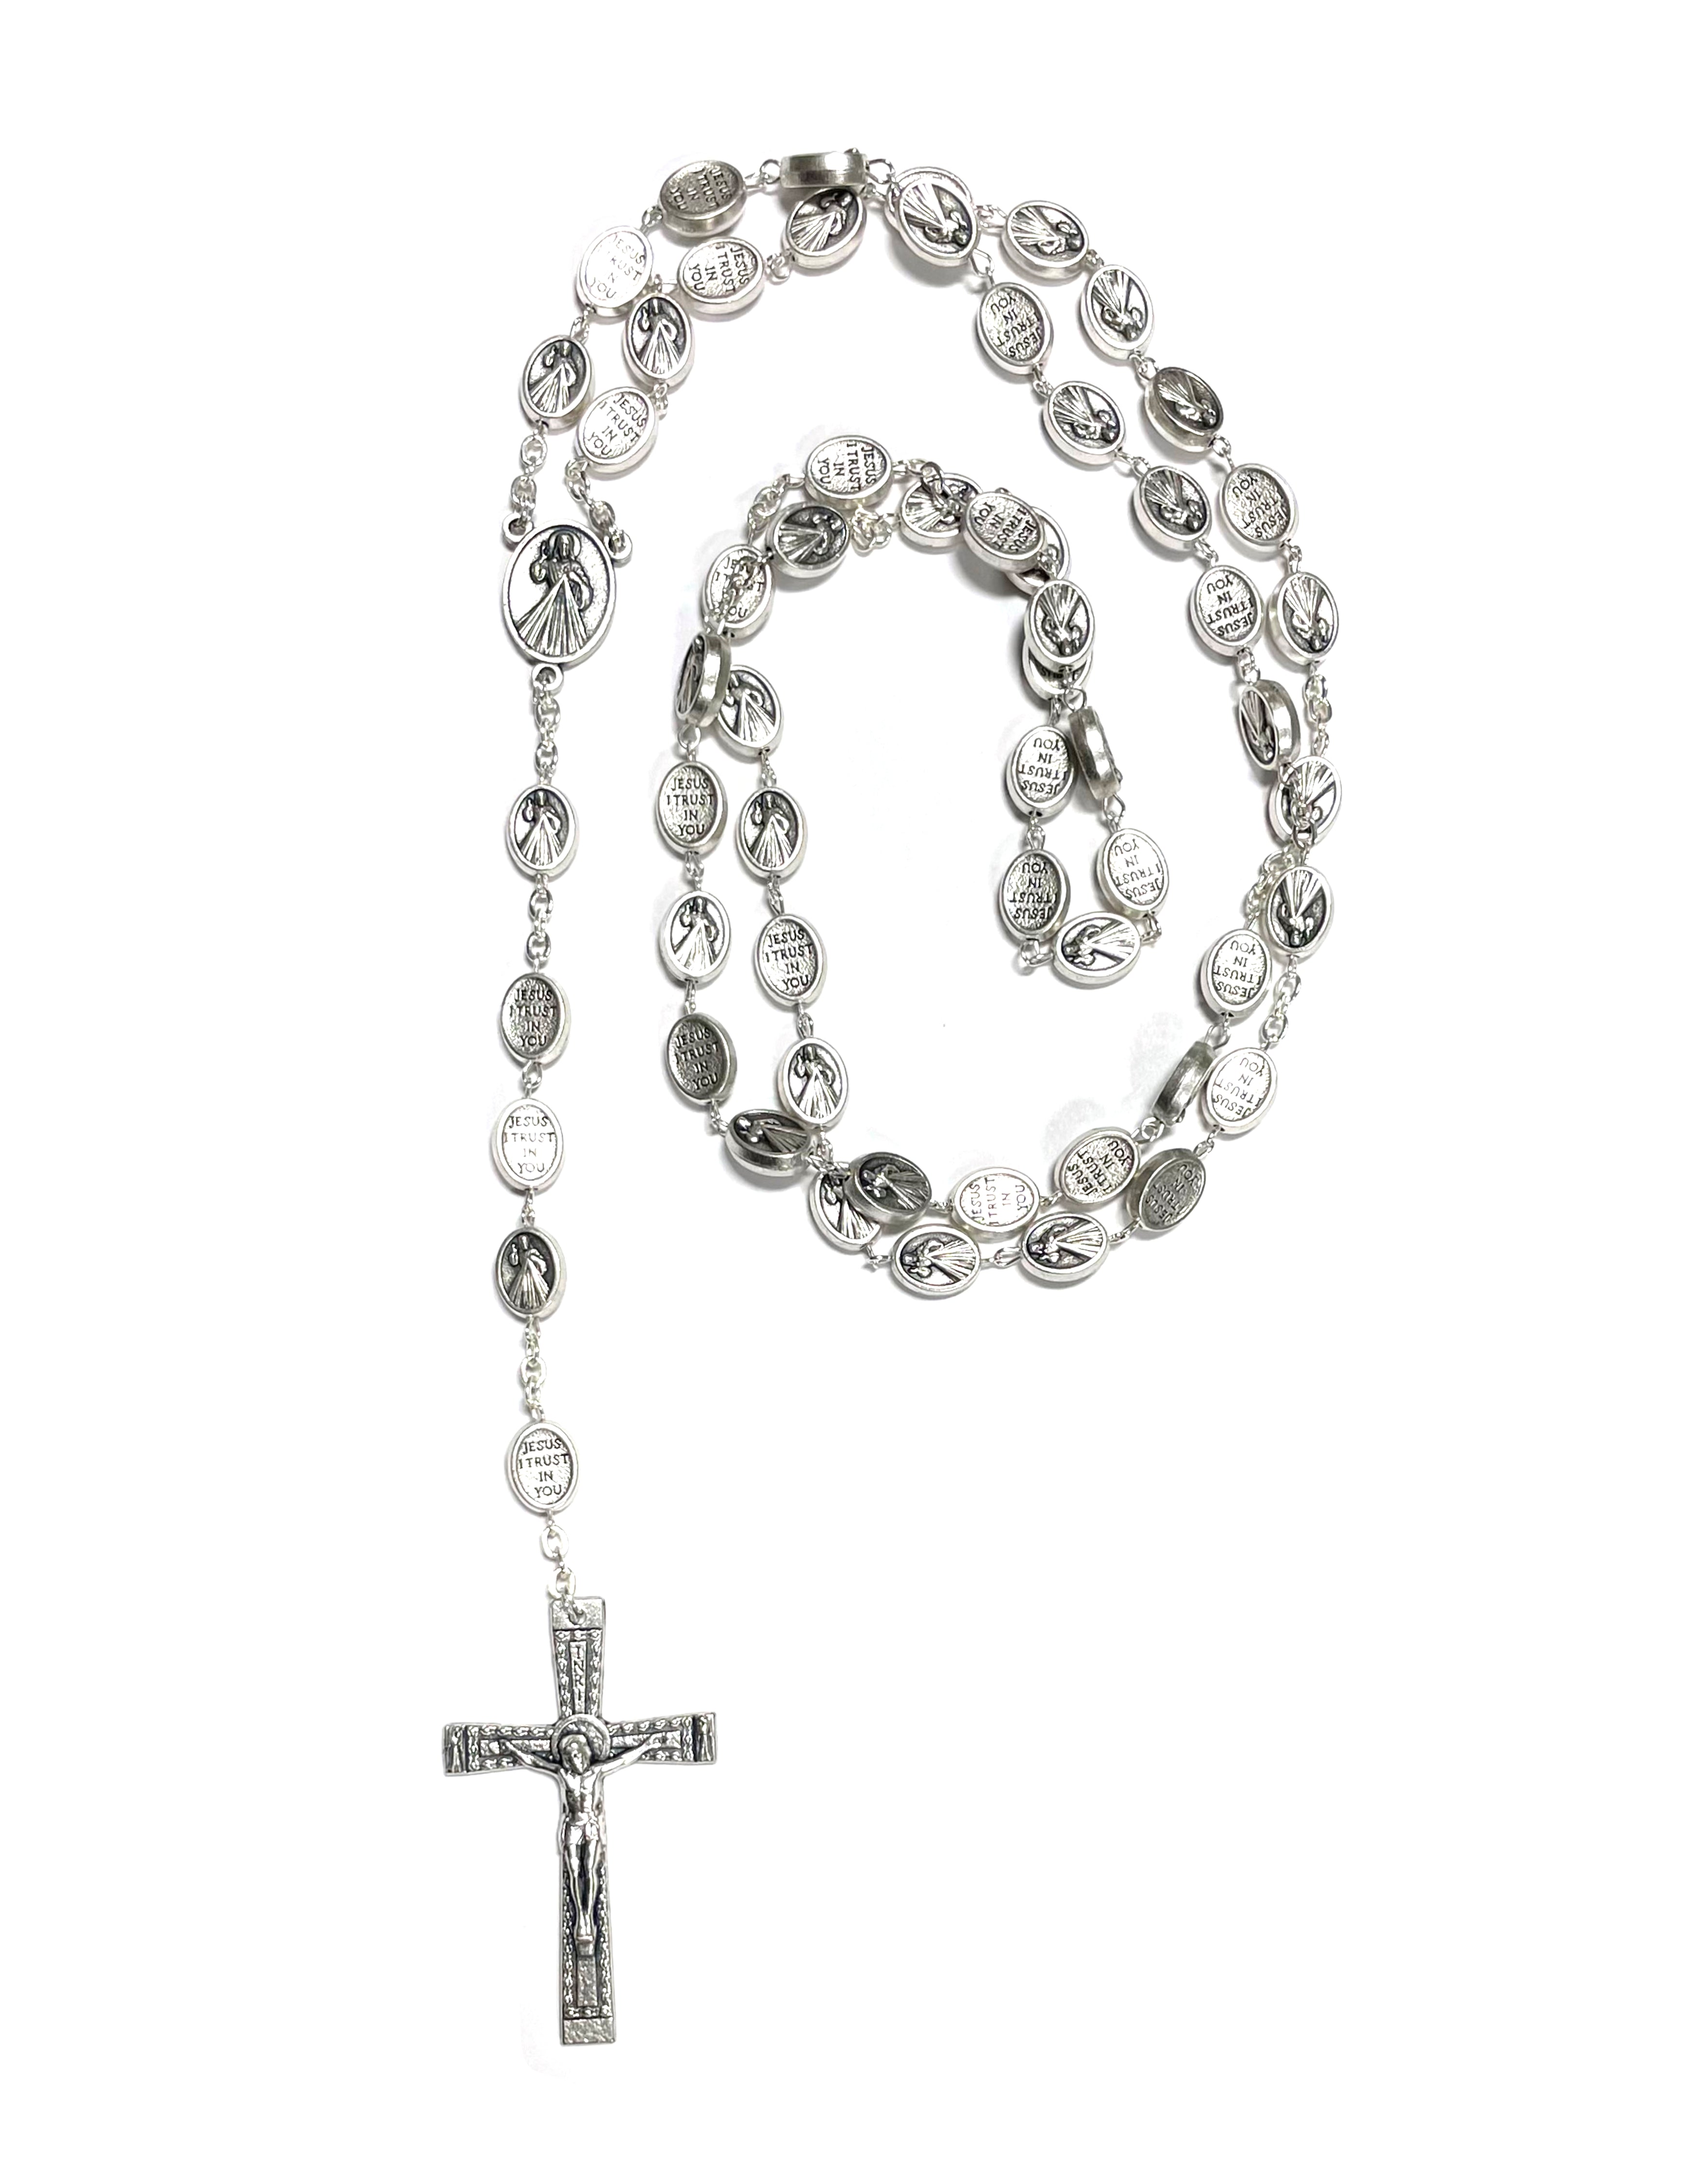 Rosary with Divine Mercy medals beads